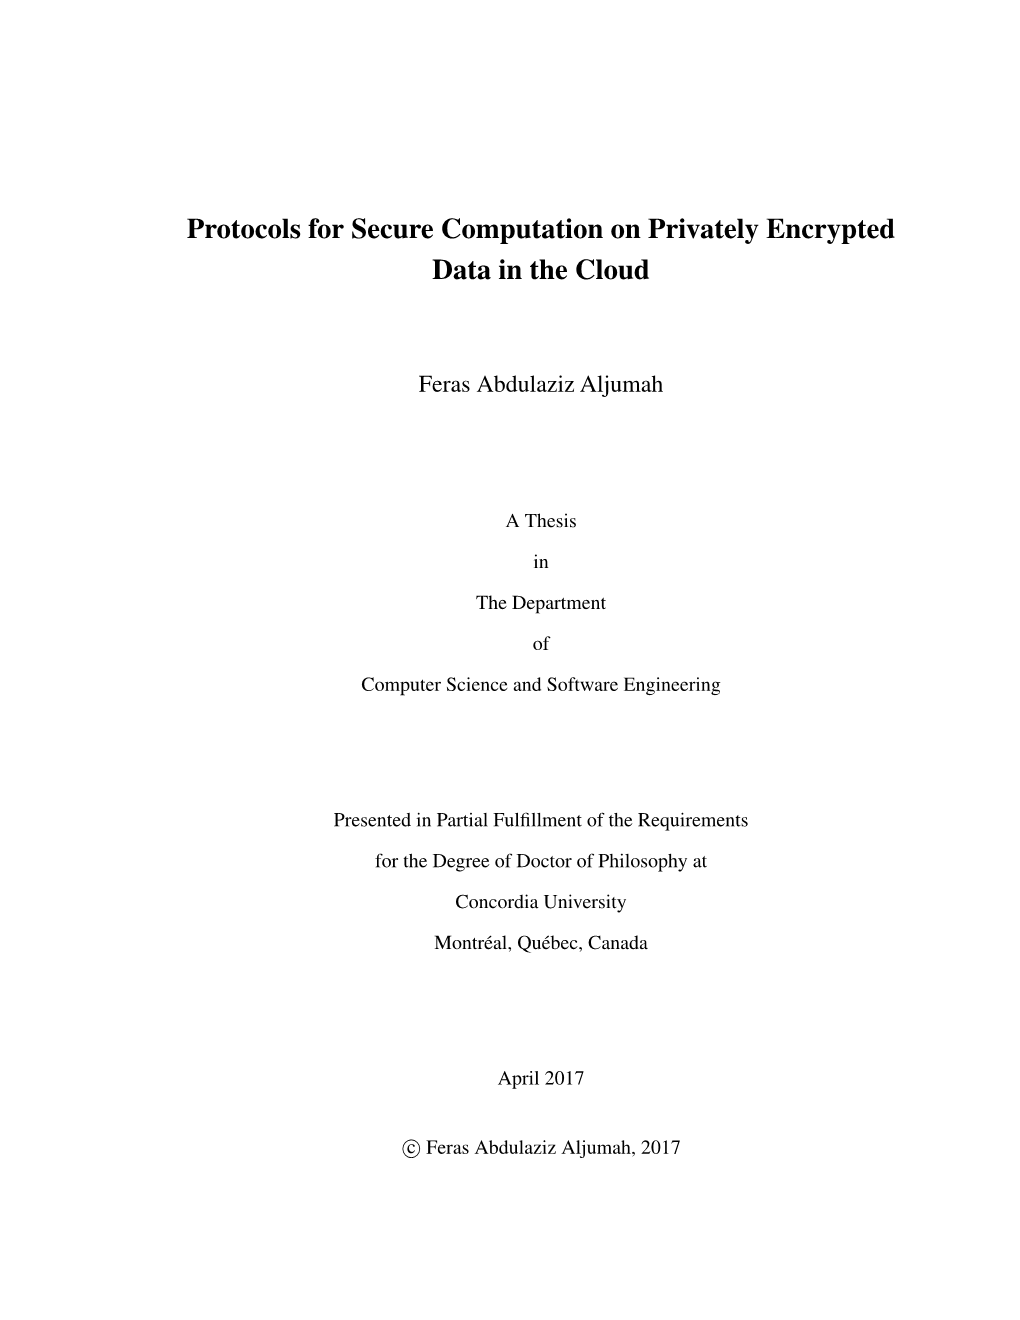 Protocols for Secure Computation on Privately Encrypted Data in the Cloud